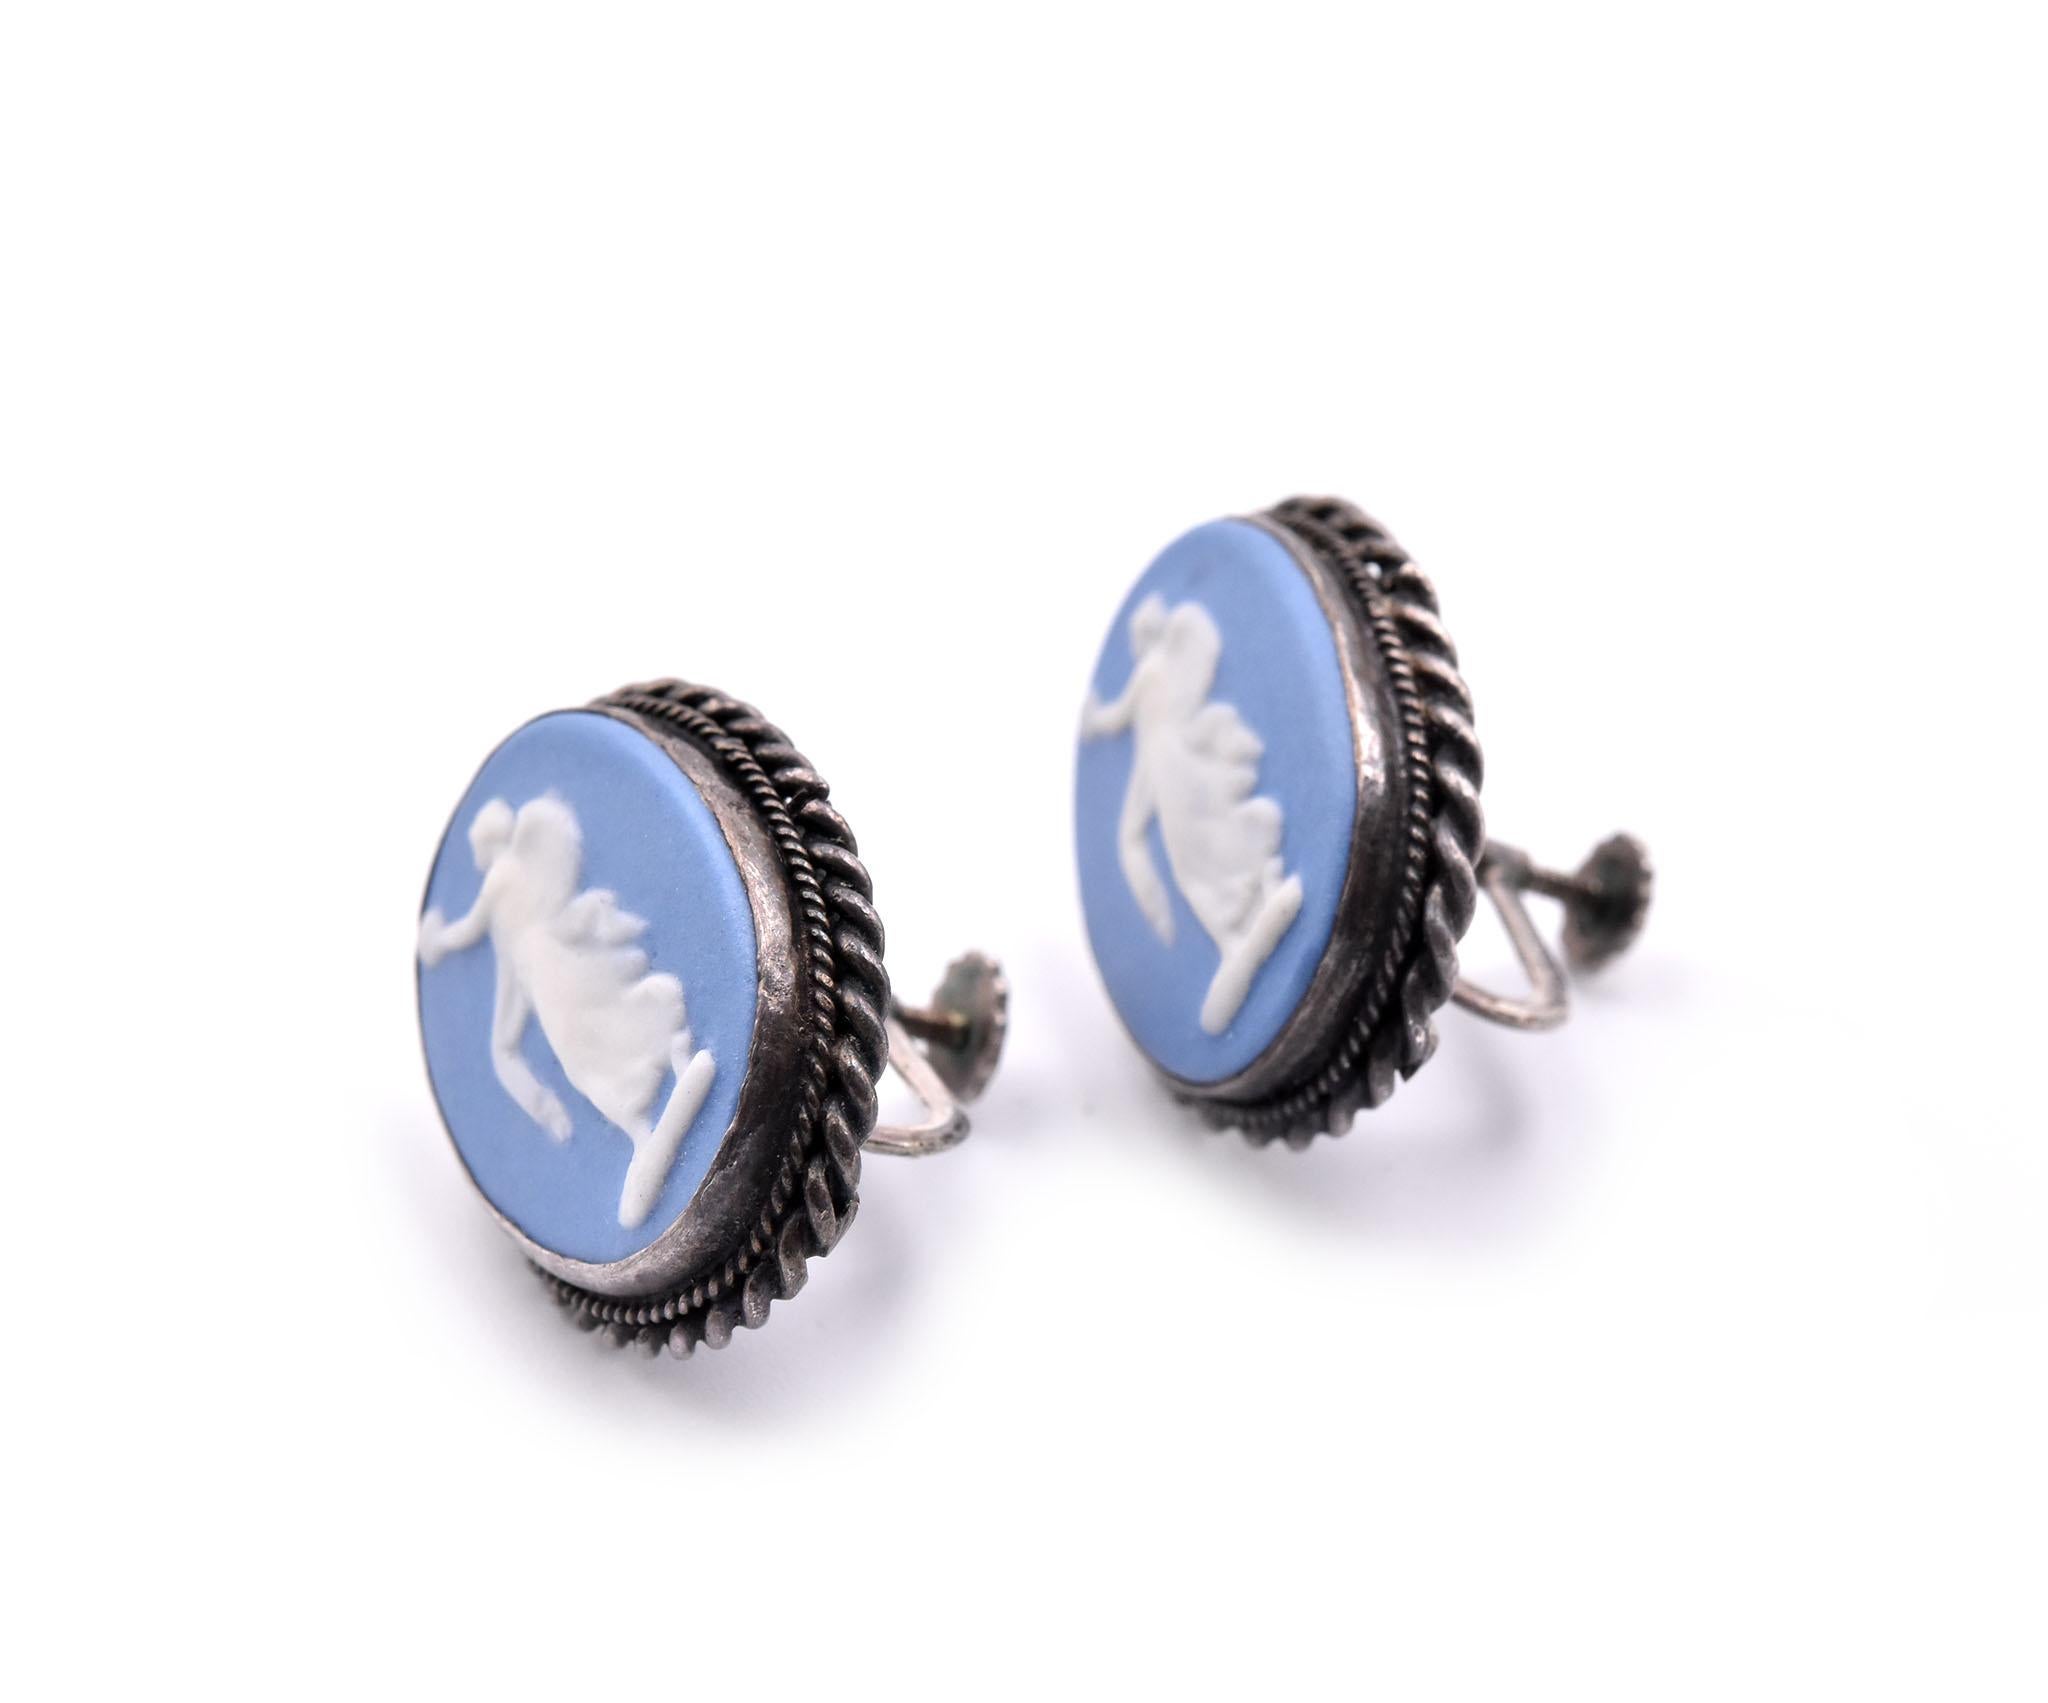 Designer: custom design
Material: sterling silver
Fastenings: non-pierced screw-back
Dimensions: earring are approximately 25.66mm by 19.37mm
Weight: 10.03 grams
